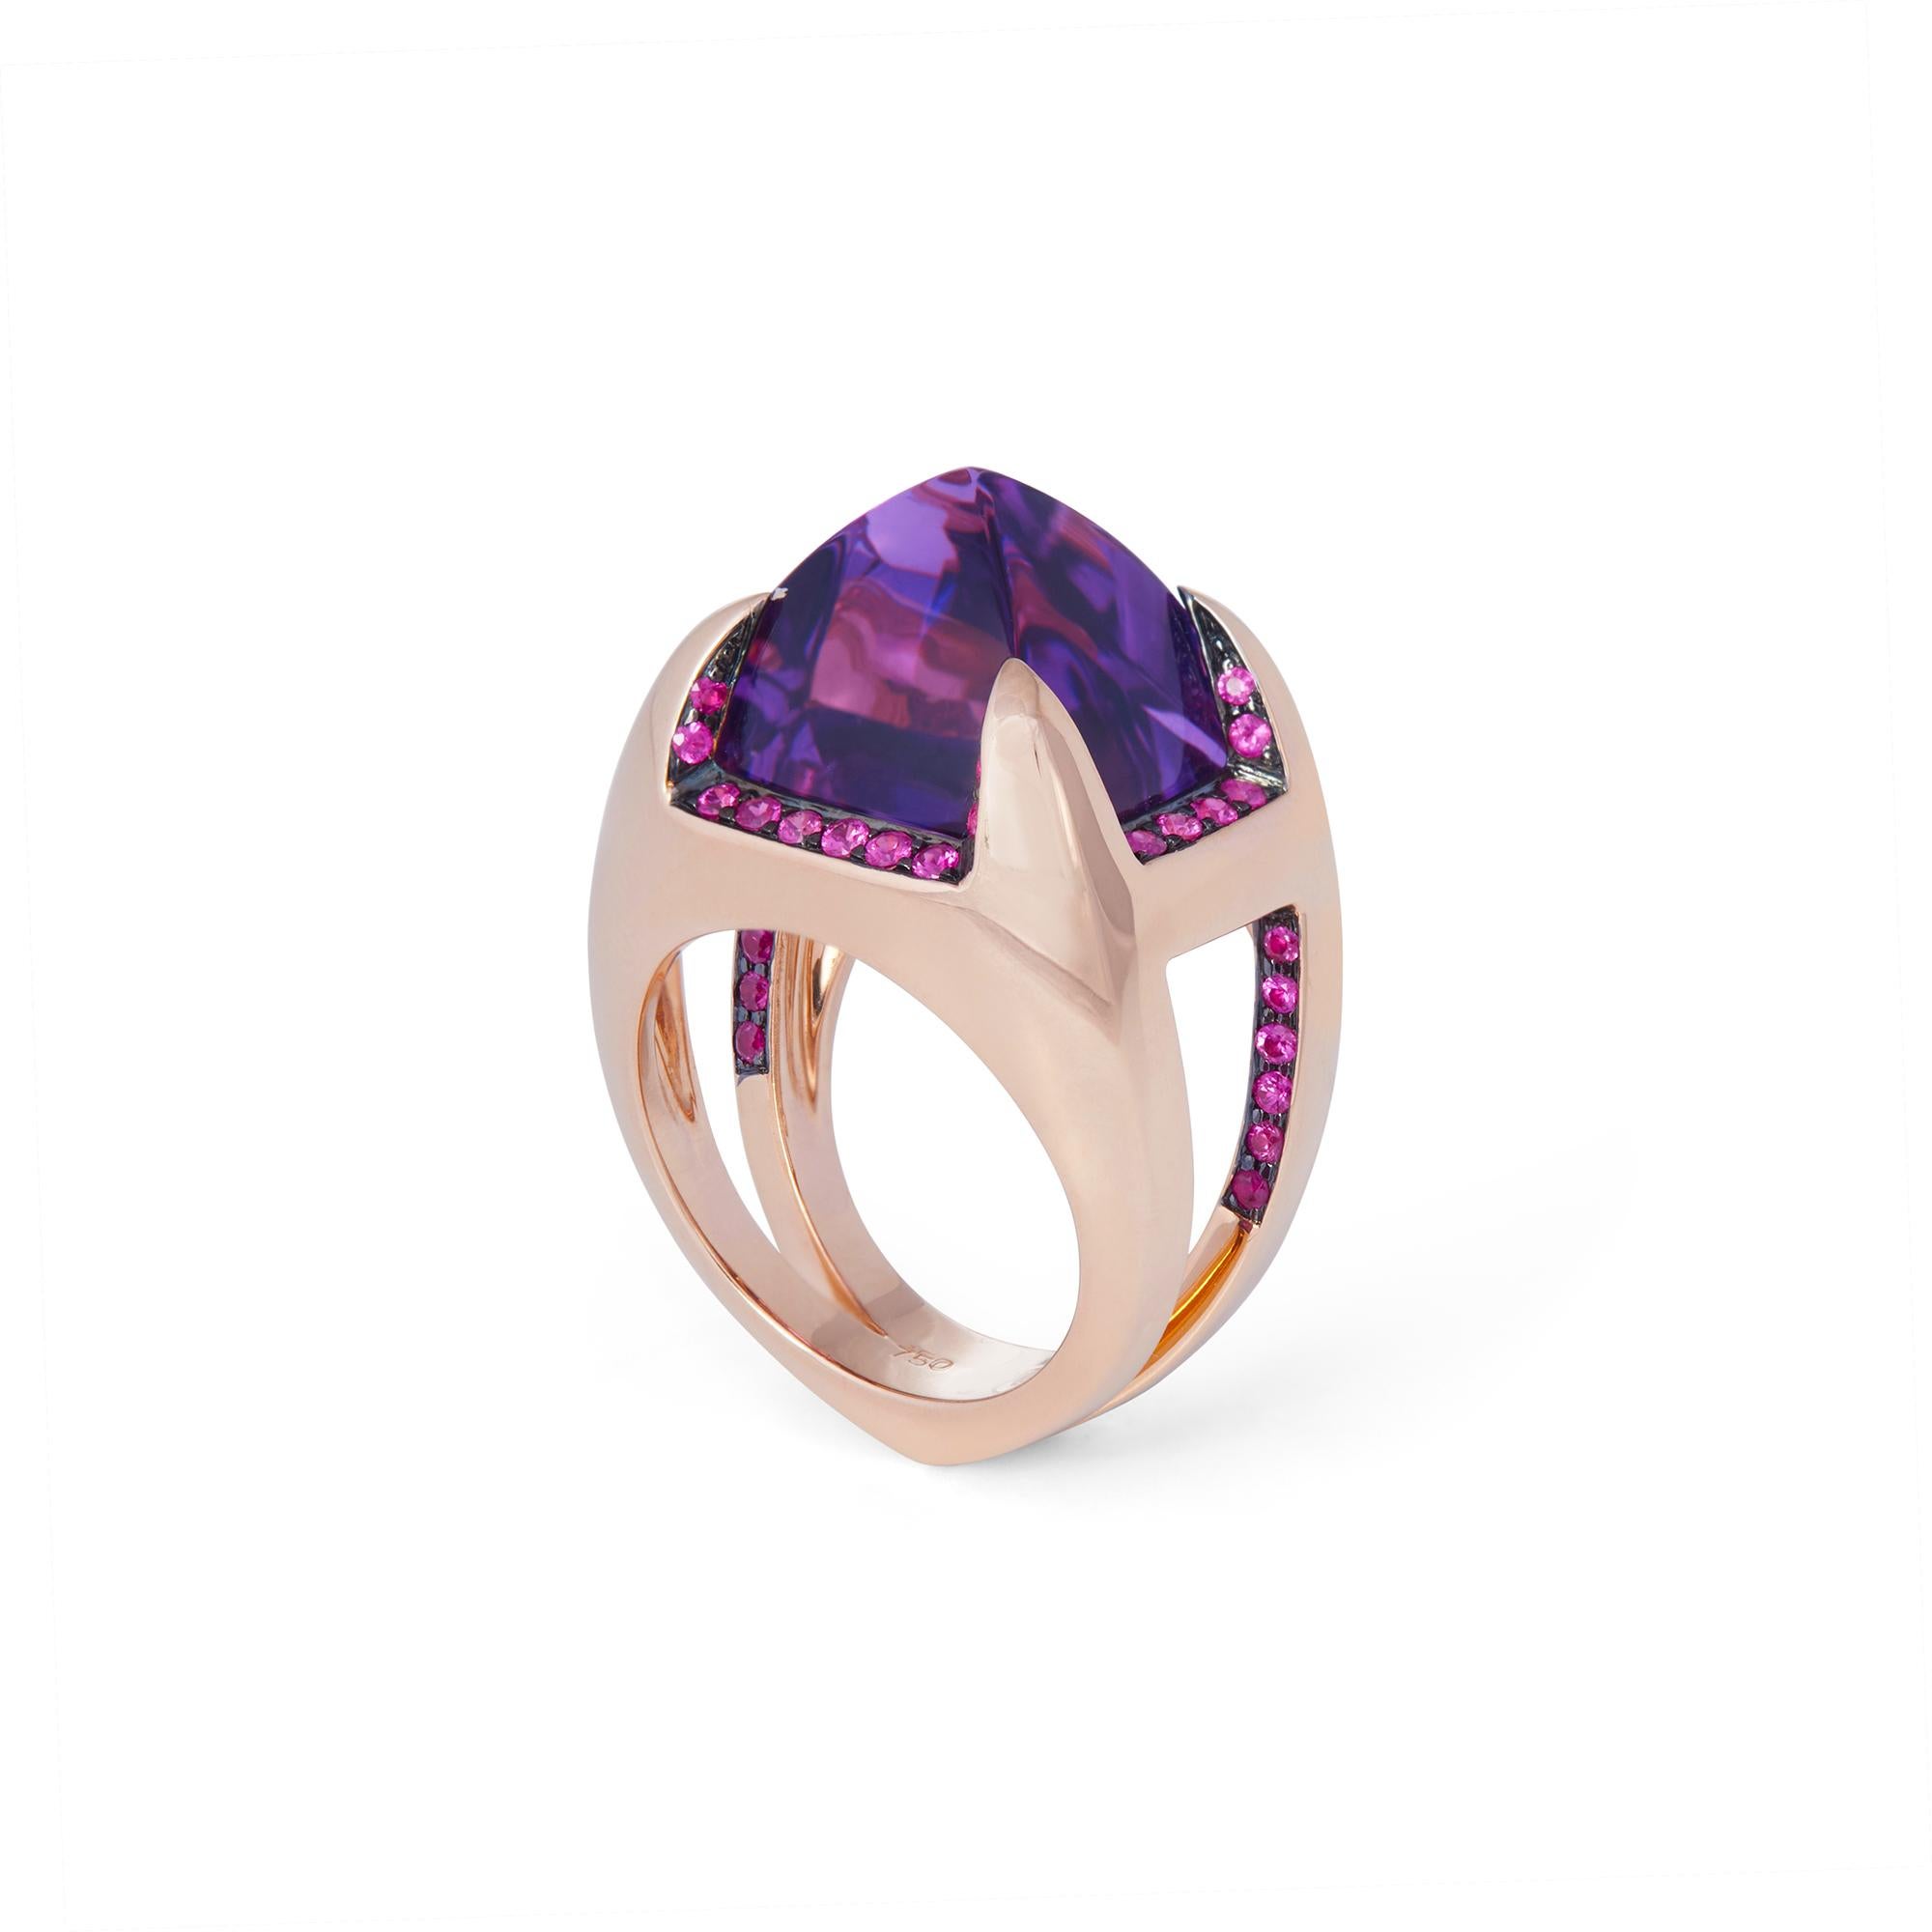 A striking cocktail ring crafted in 18 karat rose gold and set with a sugarloaf cabochon amethyst framed by pink sapphires.  US size 6 1/2.  Stamped 750, RHR.  CIRCA 2010s

Metal: 18k Rose Gold
Gemstone: Amethyst, Pink sapphire
Condition: